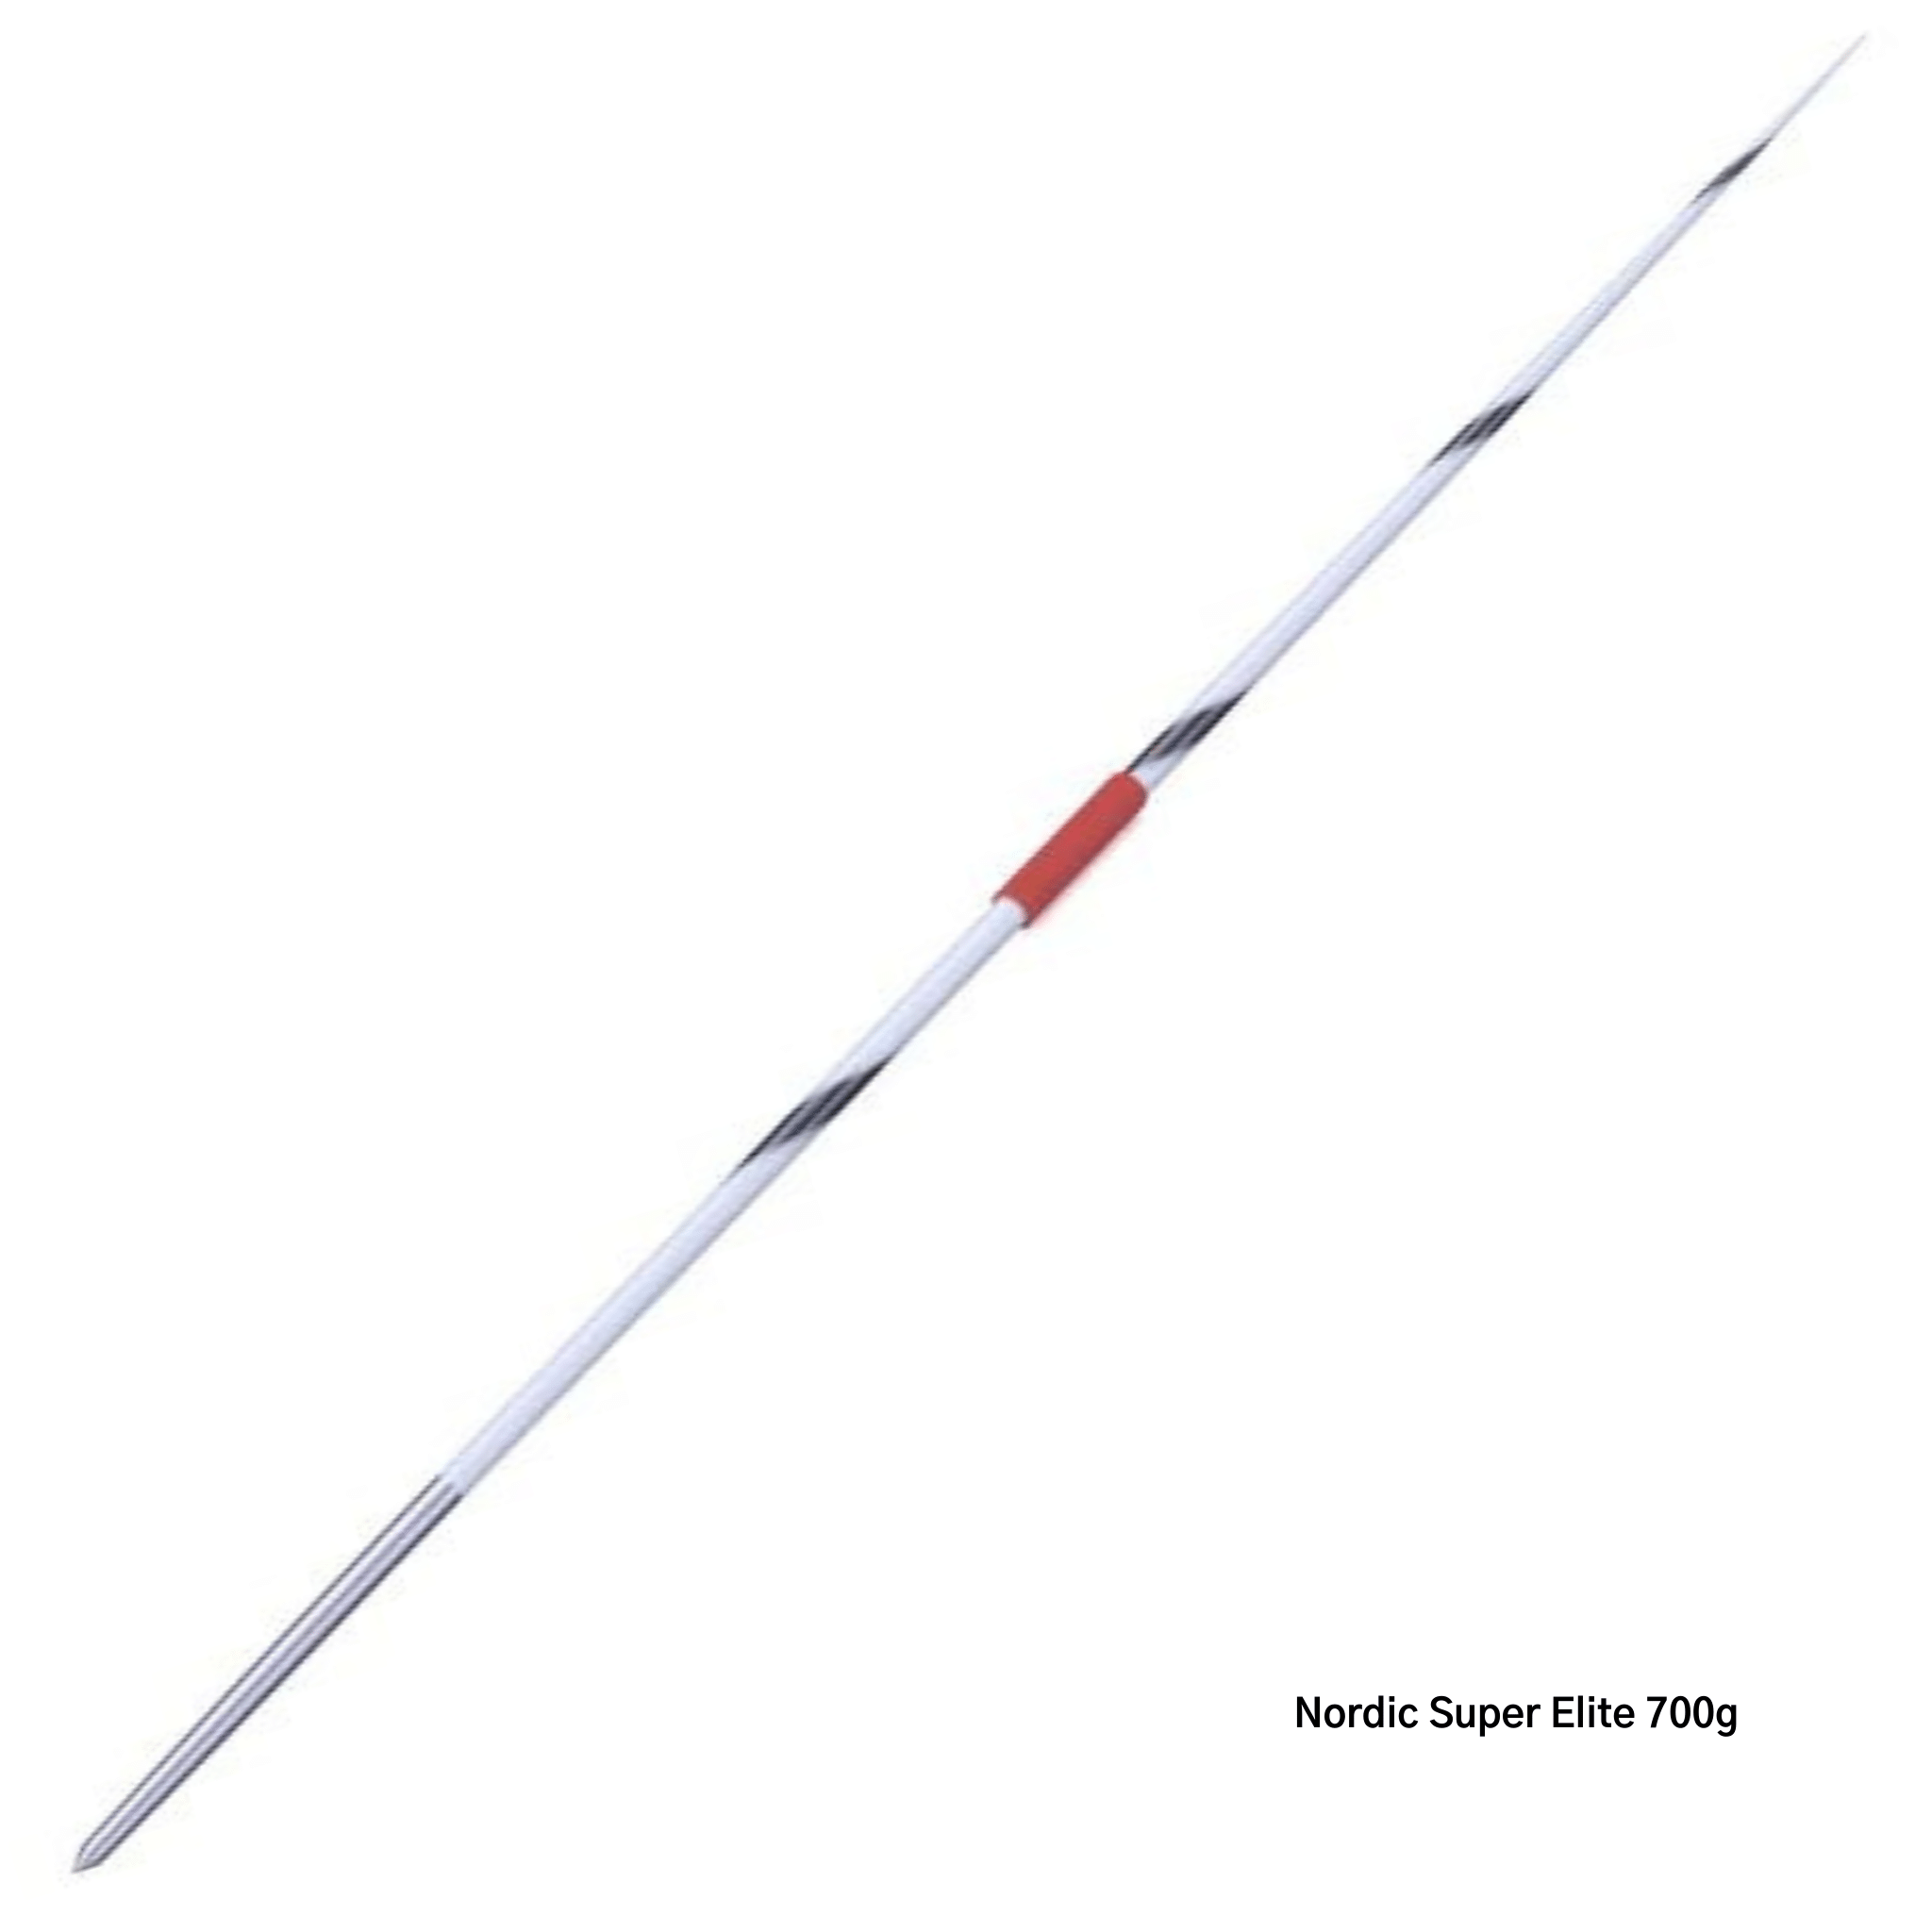 Nordic Super Elite Javelin | 700g | White body, grey spiral and red grip cord